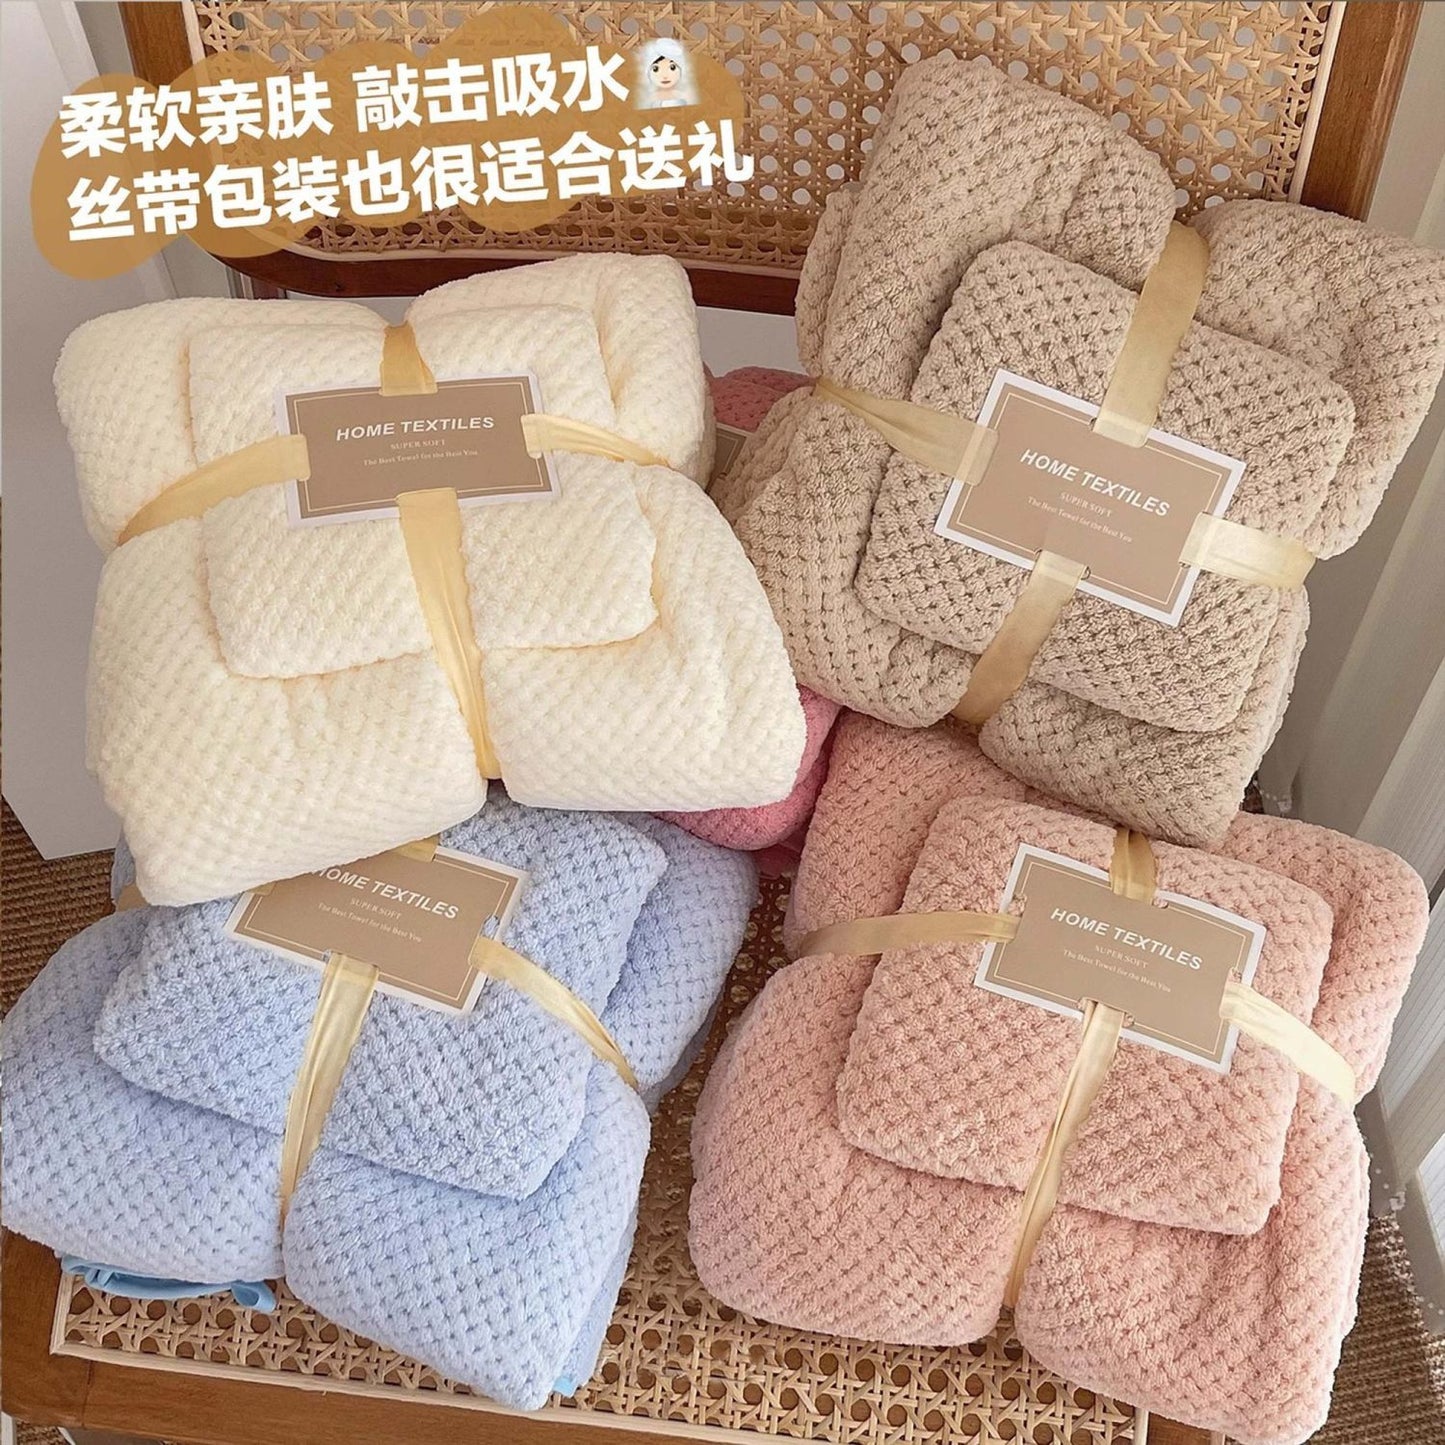 [Over 10,000 sold] A two-piece set of bath towels and towels that are more absorbent than pure cotton. It dries quickly for adults and children and does not shed hair